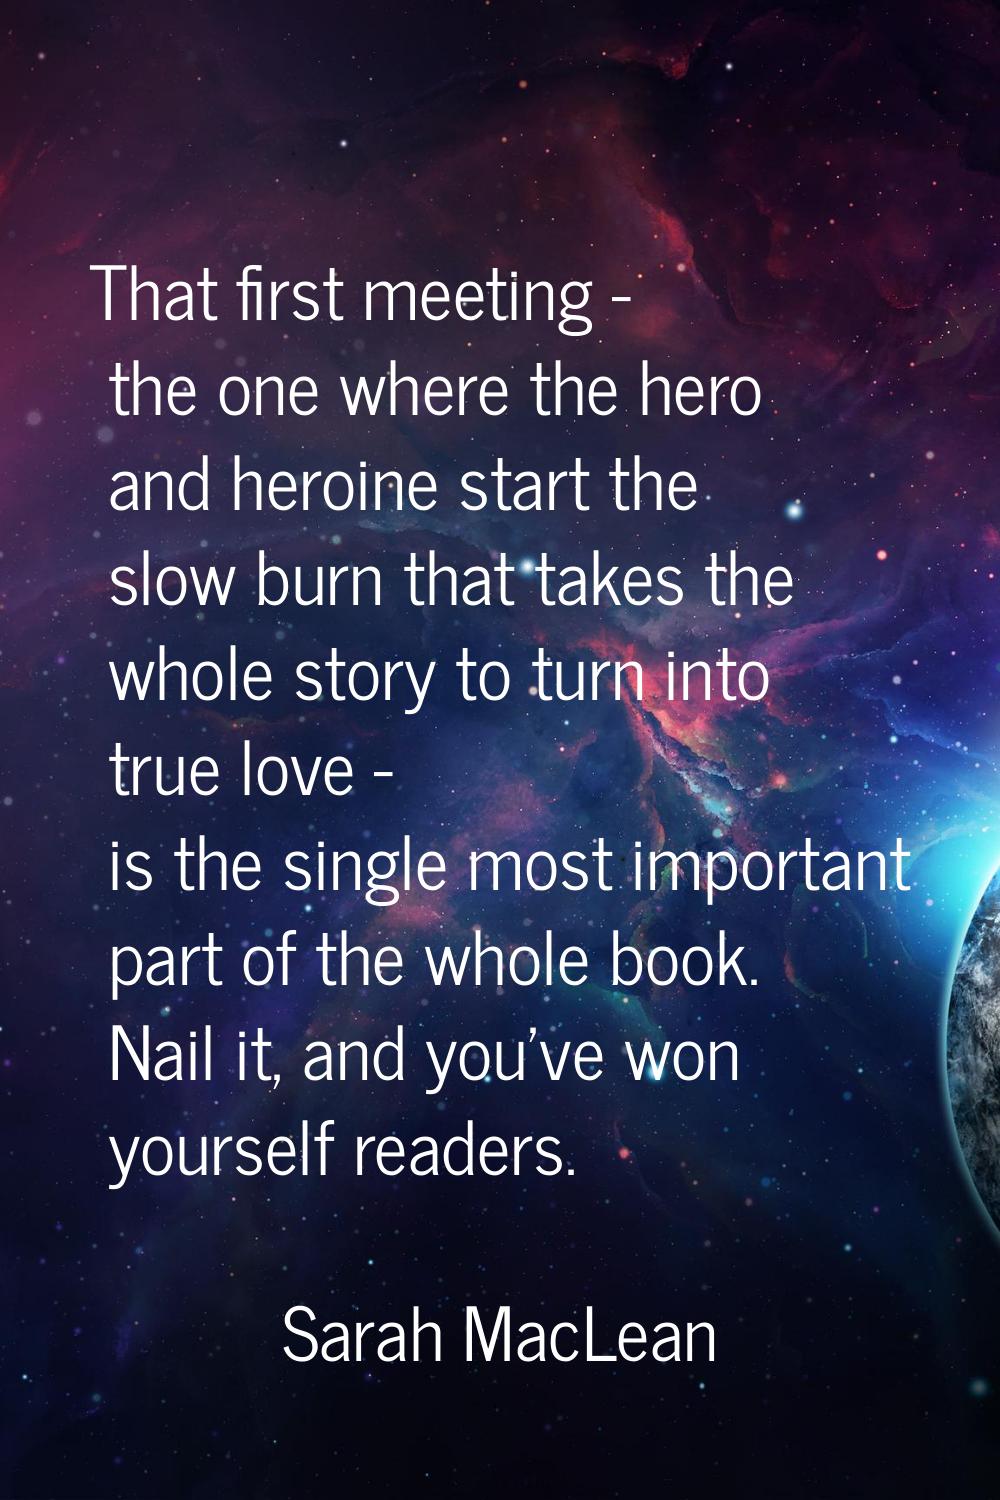 That first meeting - the one where the hero and heroine start the slow burn that takes the whole st